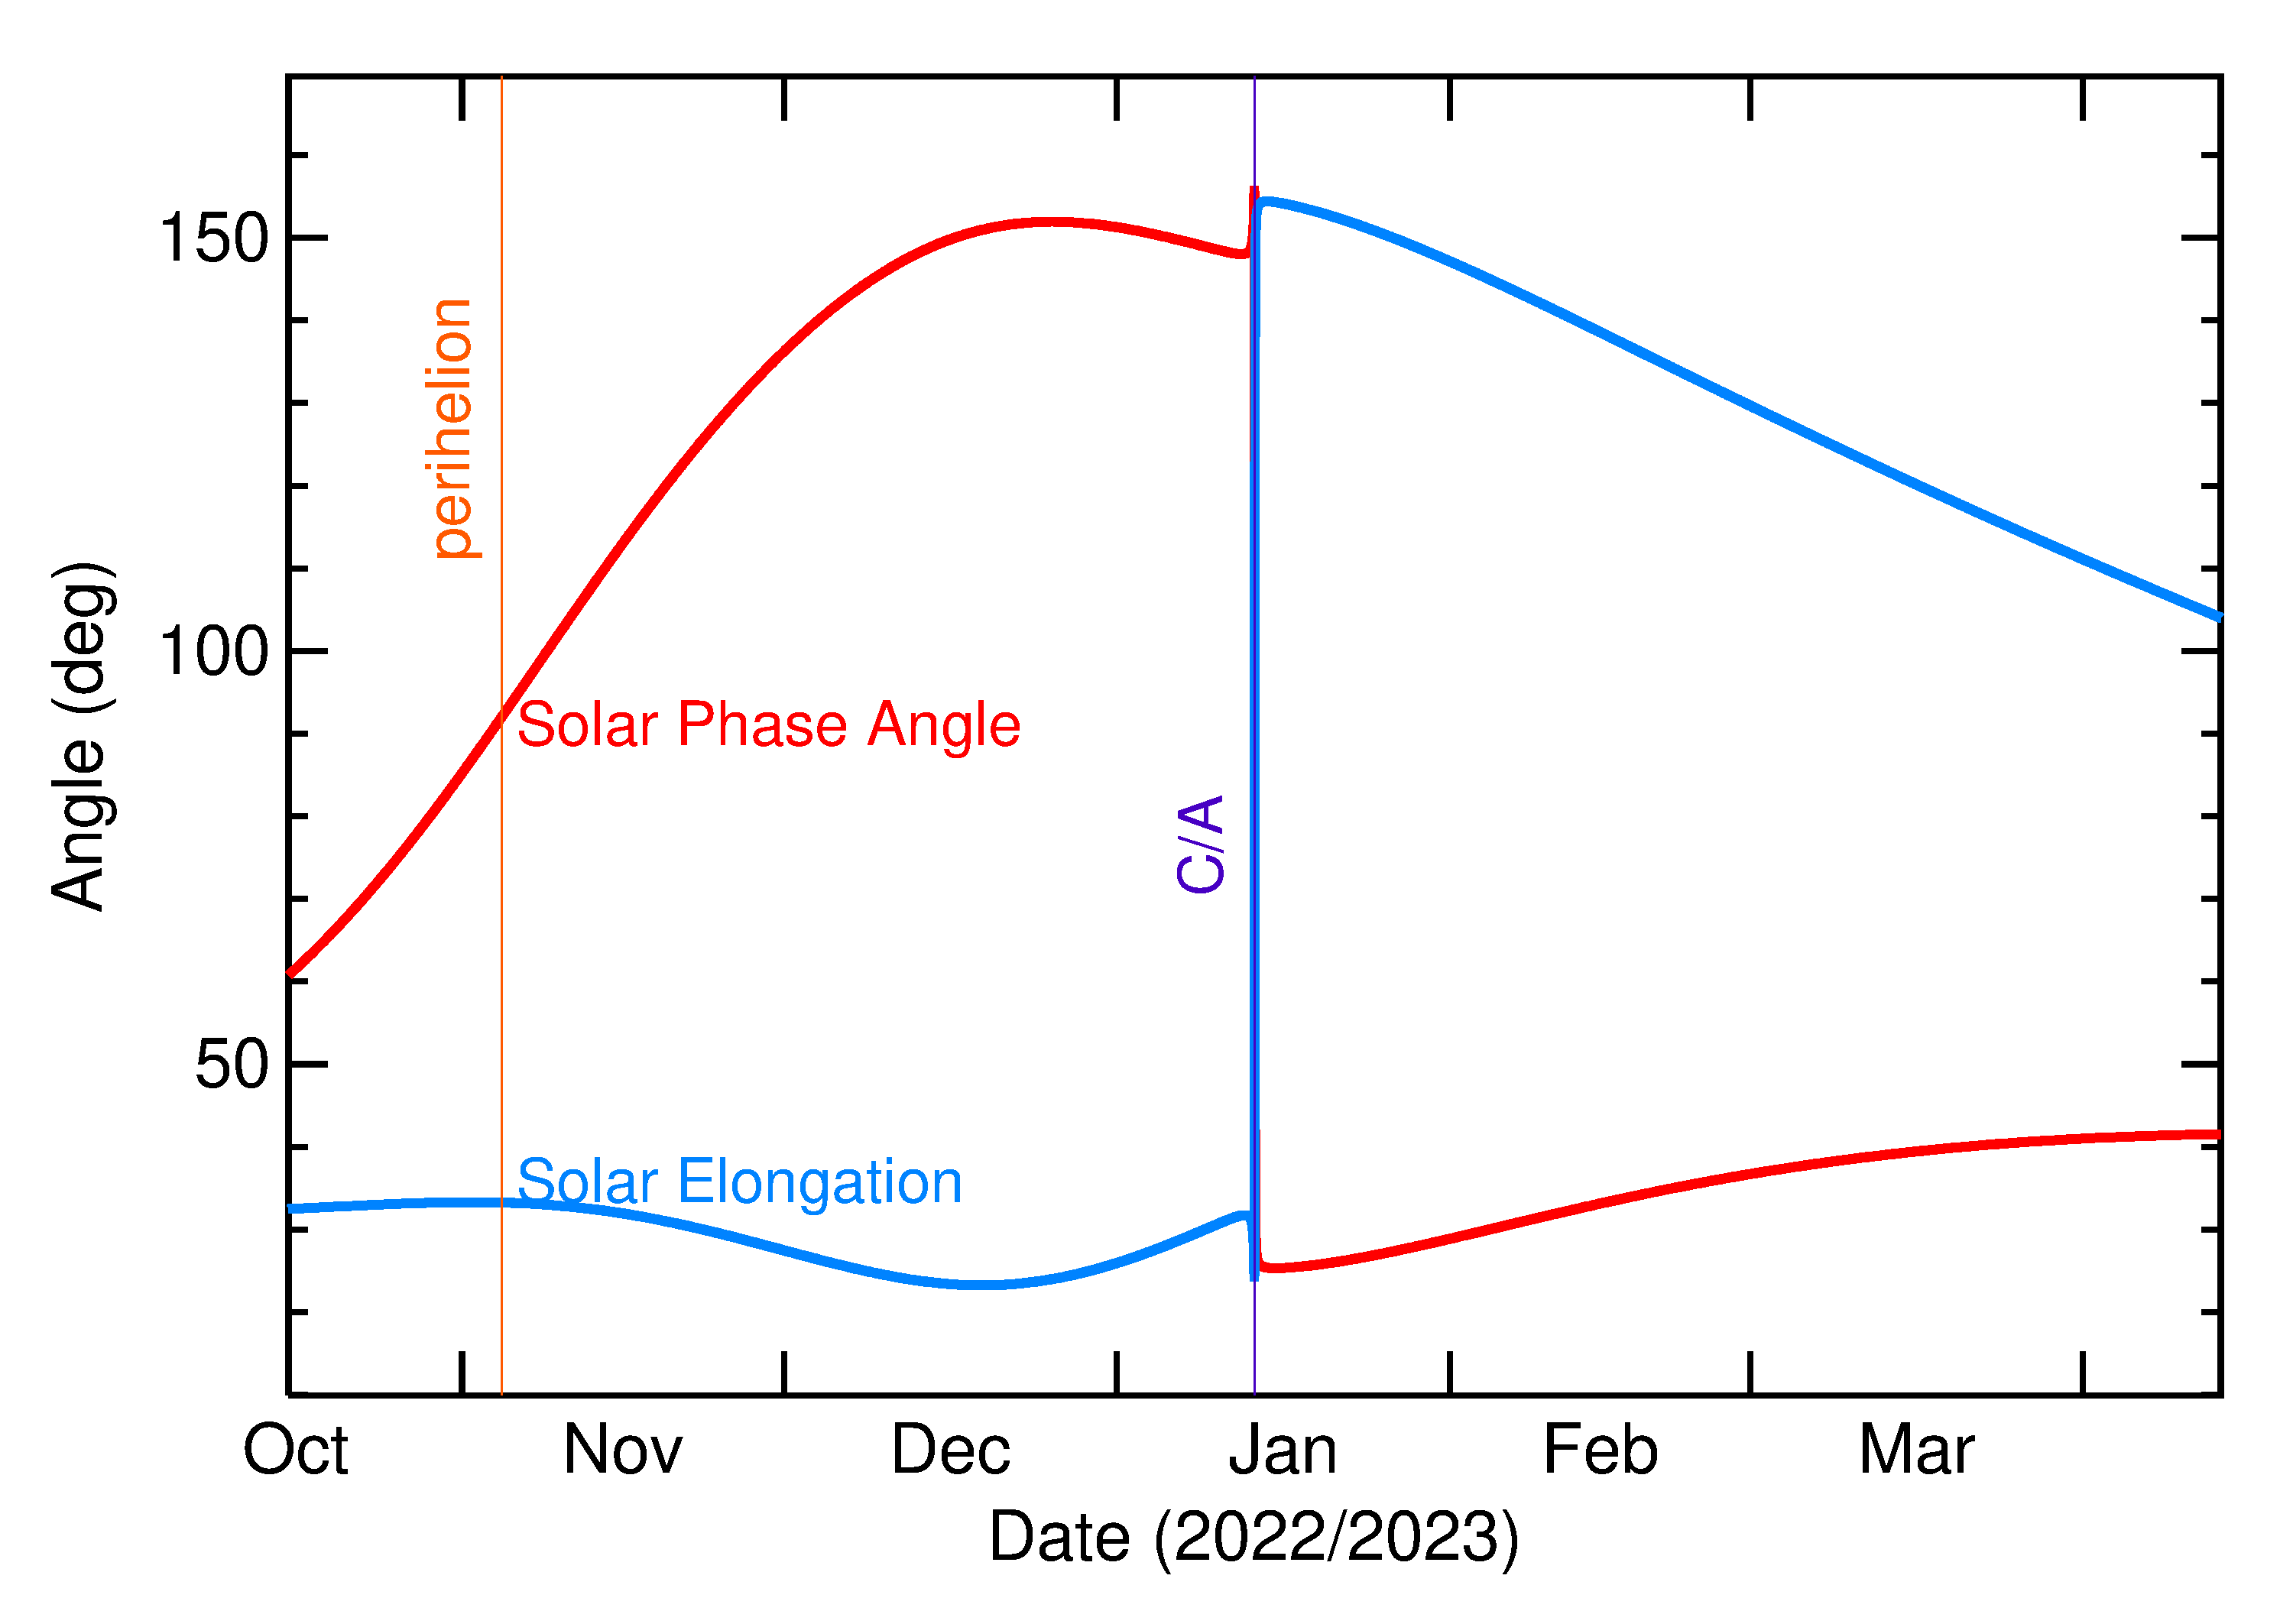 Solar Elongation and Solar Phase Angle of 2023 AV in the months around closest approach